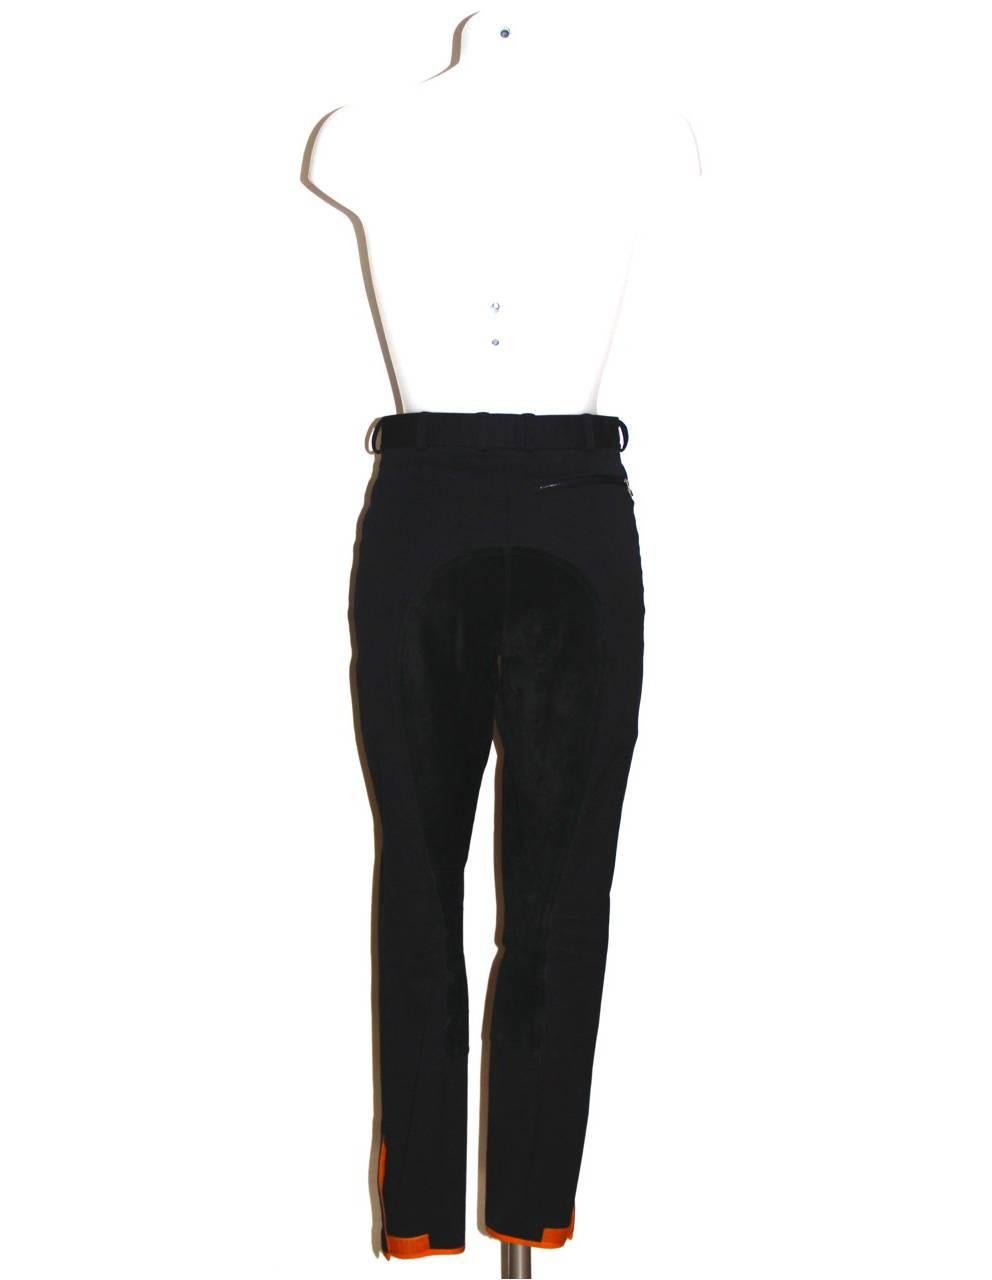 Elegant Hermès black stretch cotton jodhpur pants featuring black suede at inseams, three zippered pockets with stirrup zipper pulls (two front, one back), hook-and-eye/zip fly and snap front button closure and orange scratch closure at ankle.